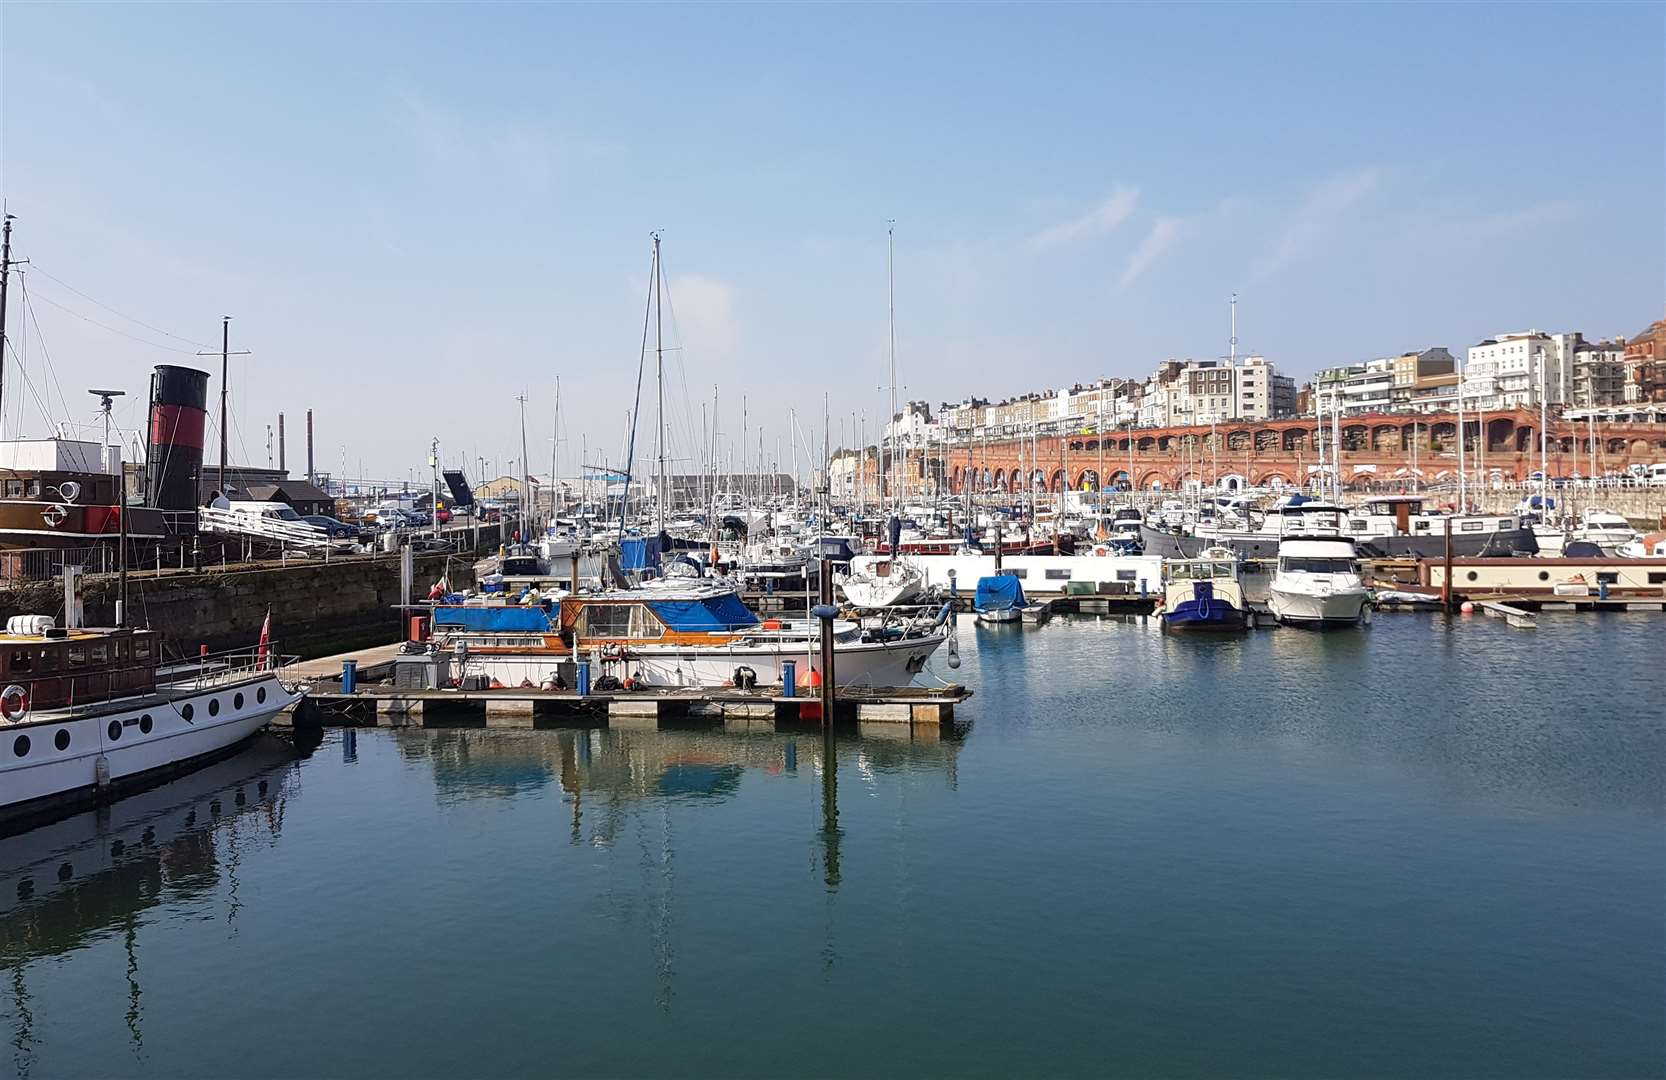 Christopher Douglas went into the water at Ramsgate Marina